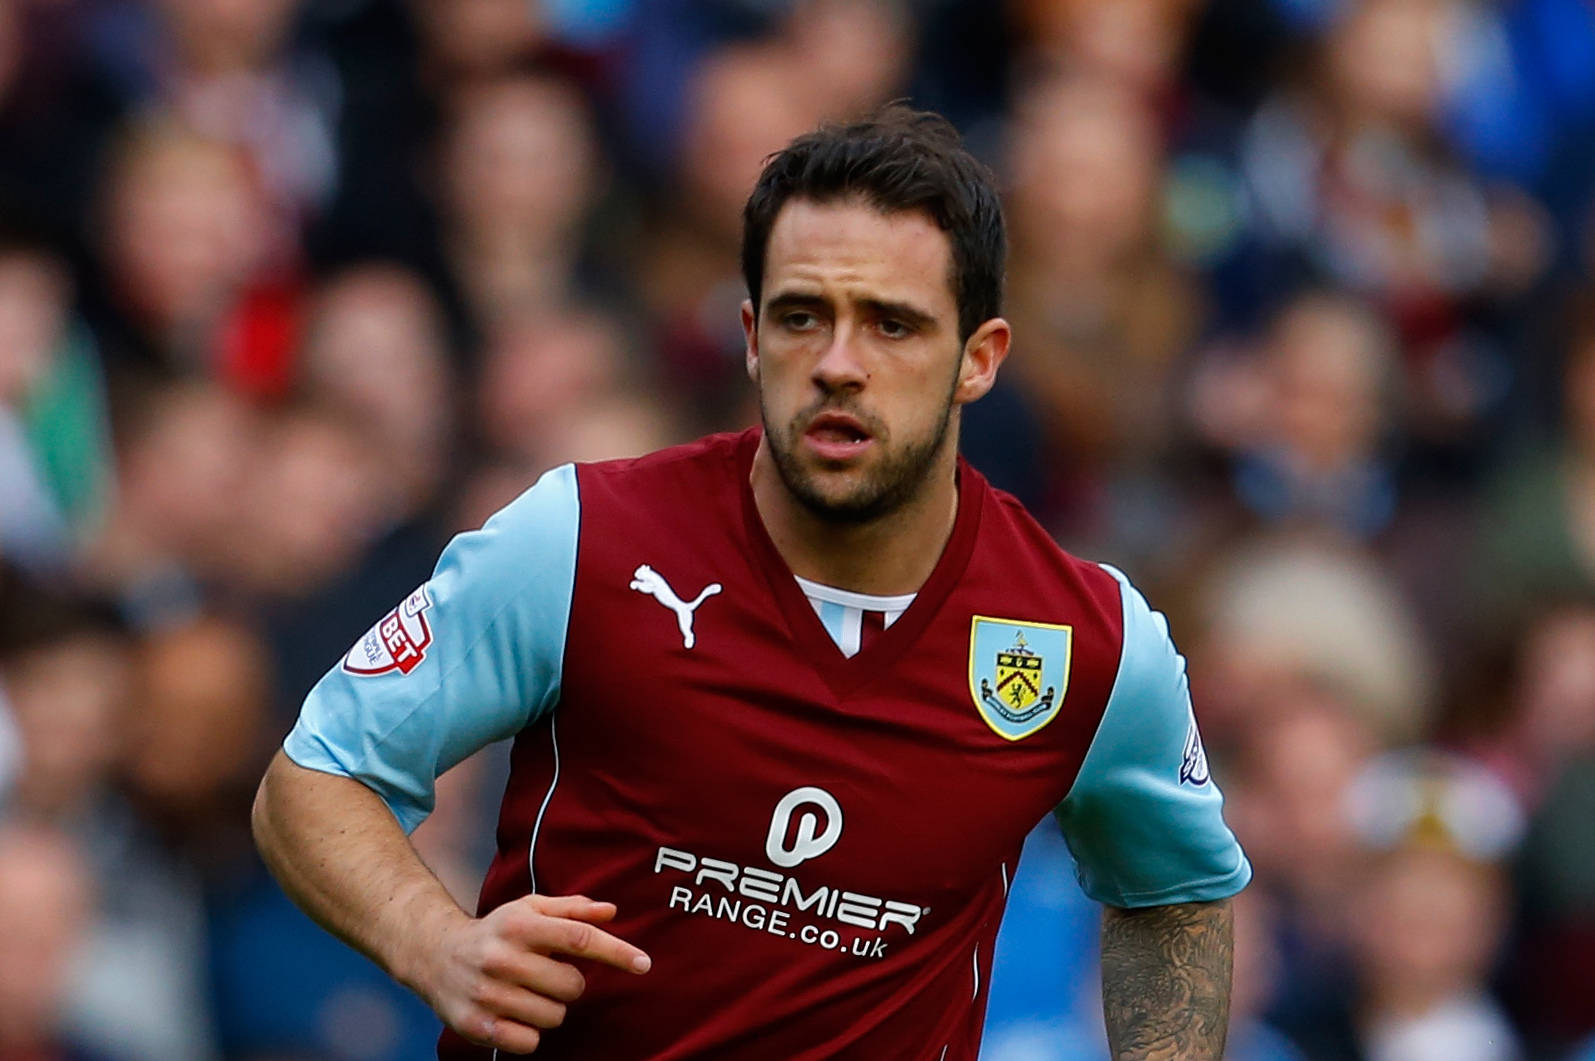 Dannyings Tongue In Cheek Would Be Translated To 